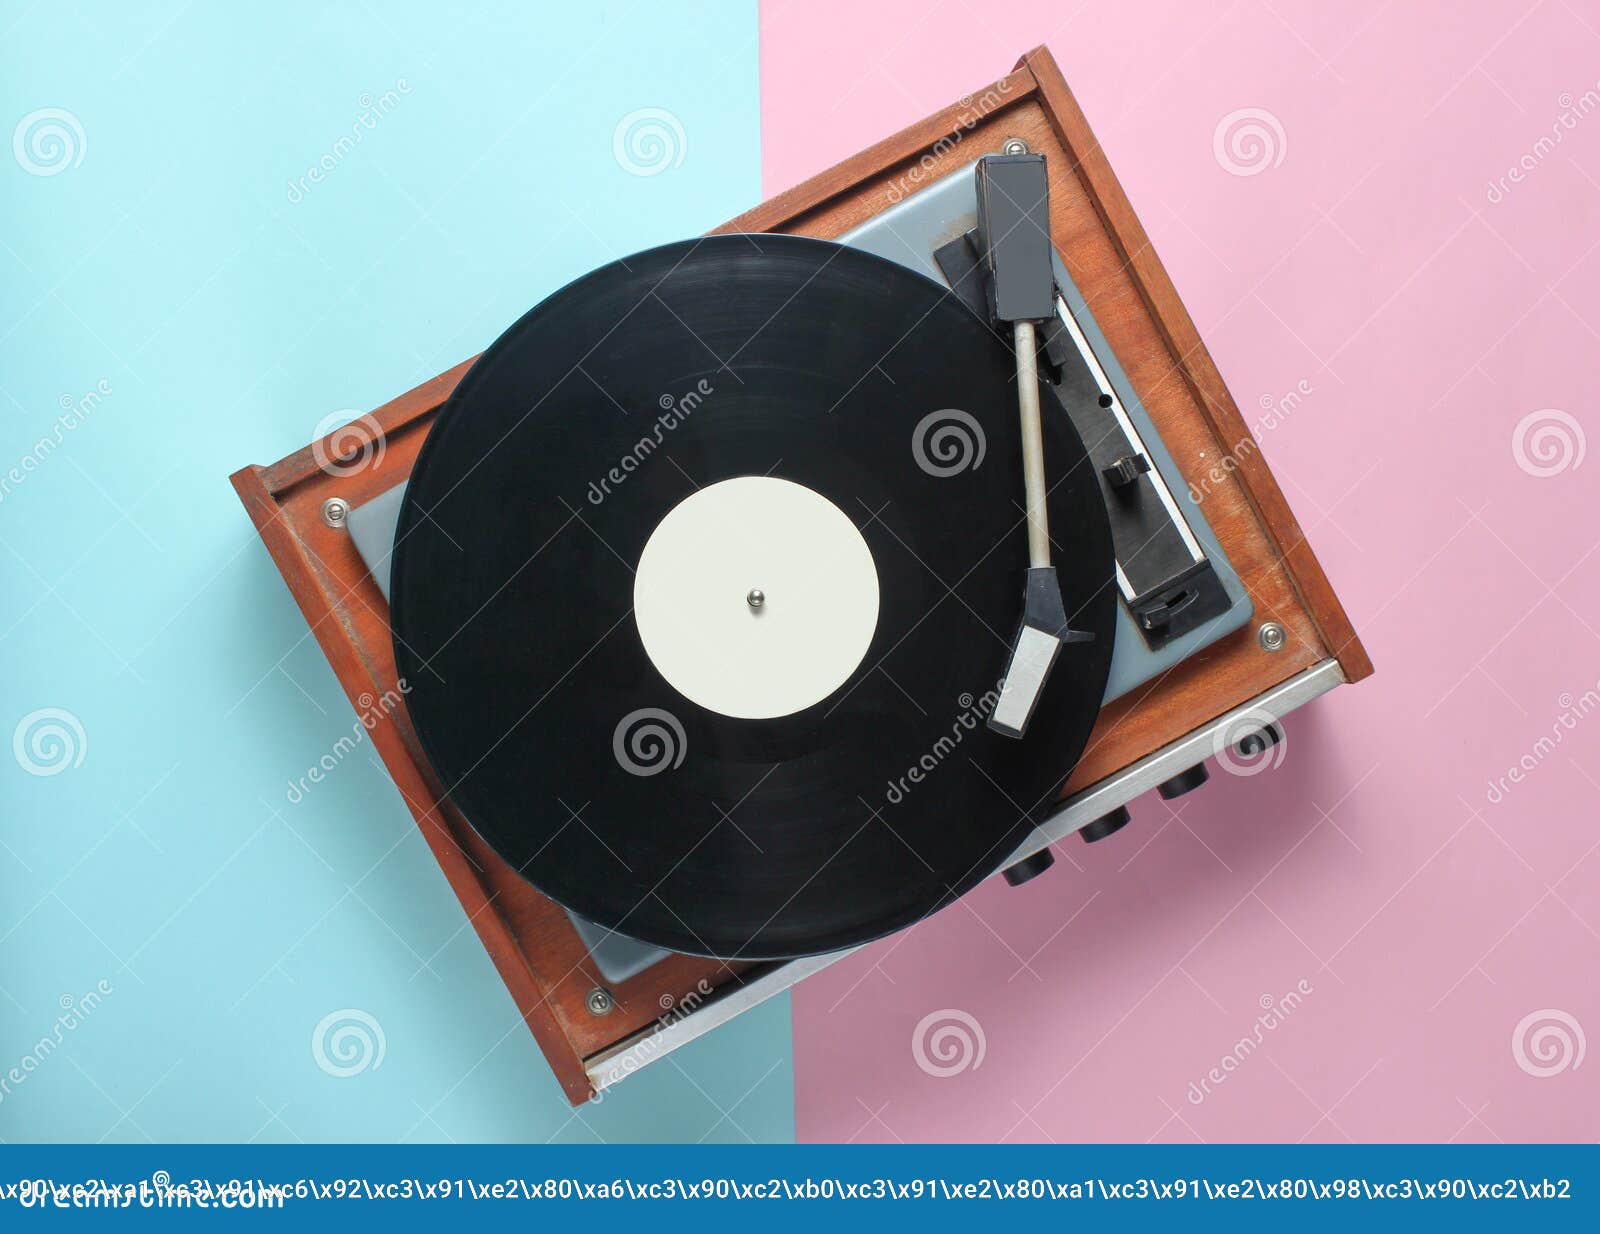 Vinyl Player on a Blue Pink Pastel Background. Top View. Stock Image - Image of counterweight: 135521867